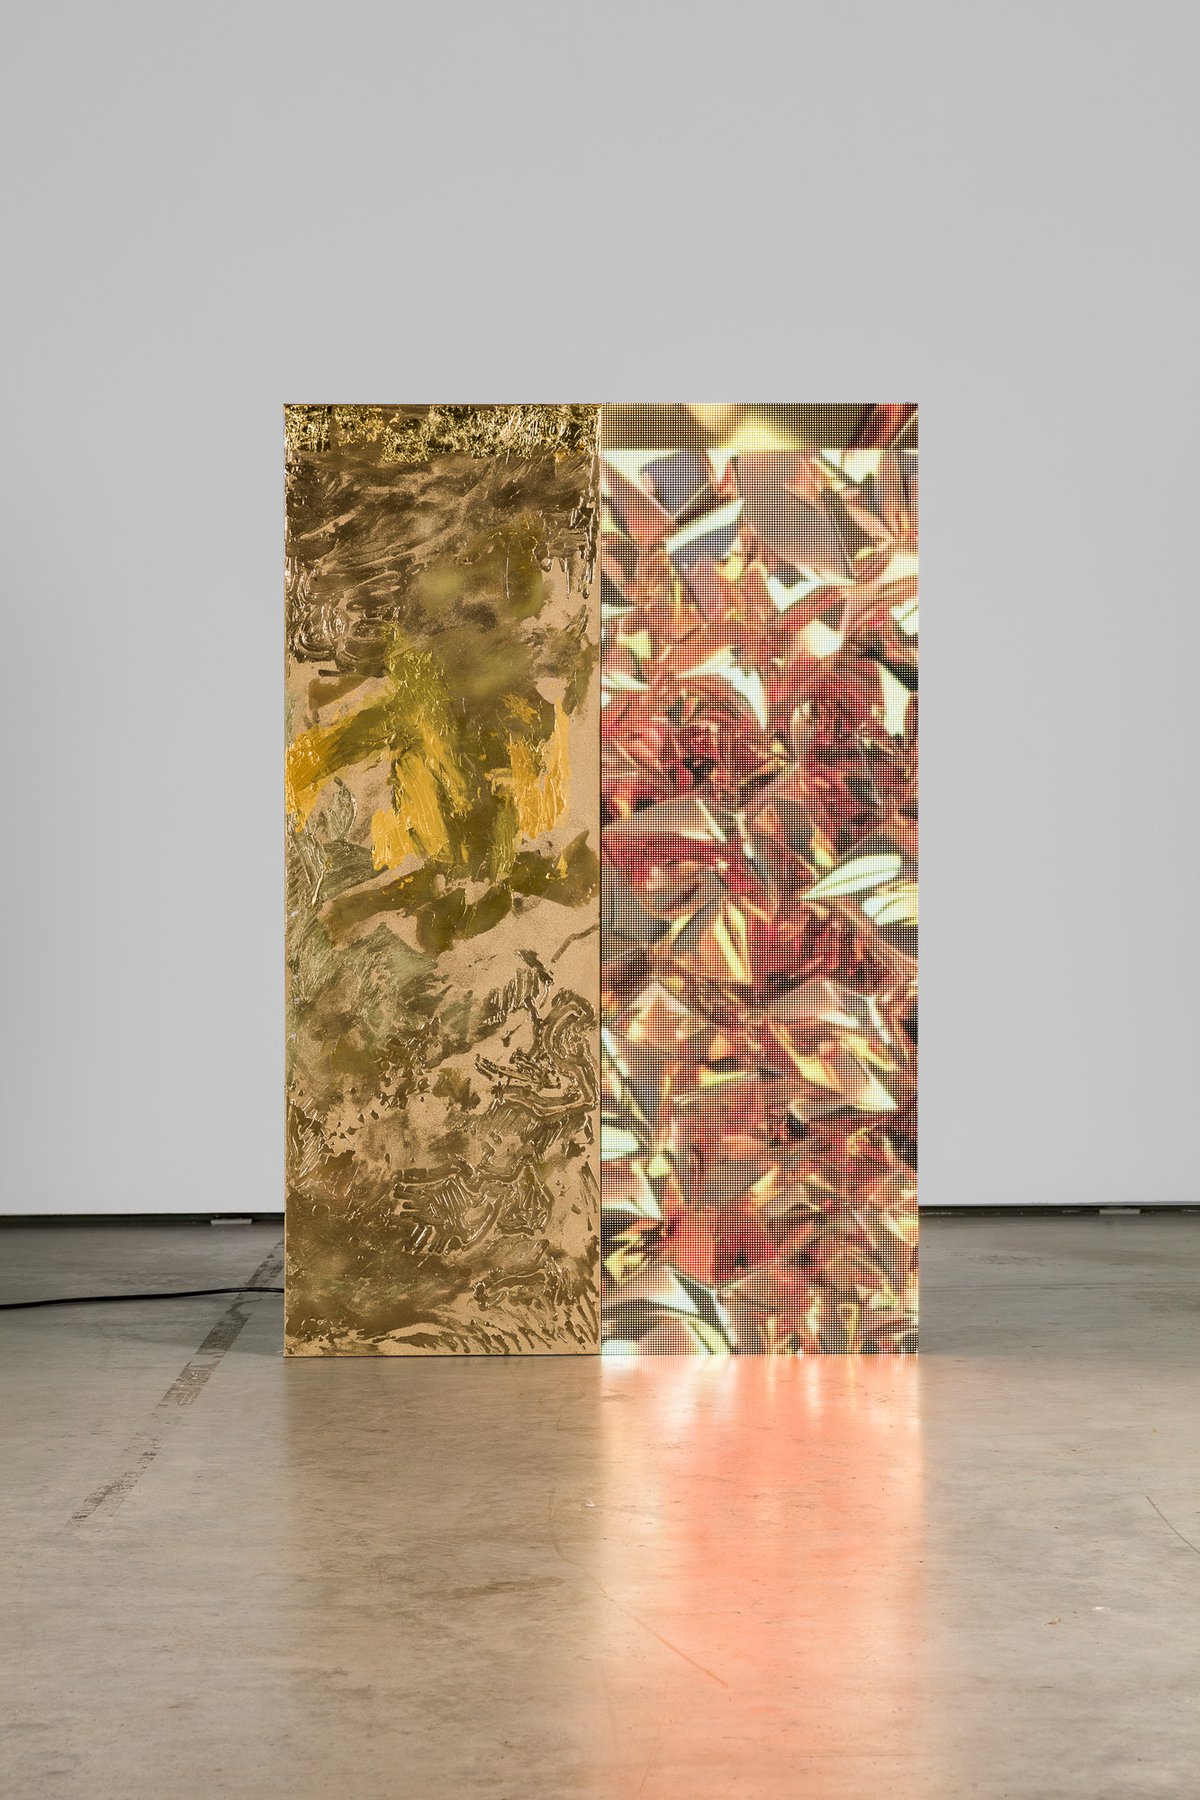 Philipp TimischlHard workers (Gold &amp; Gold), 202124k gold leaves, gold effect spray paint and acrylic paint on canvas, LED panels, metal truss, media player, video 00:03:30150 x 100 x 50 cm